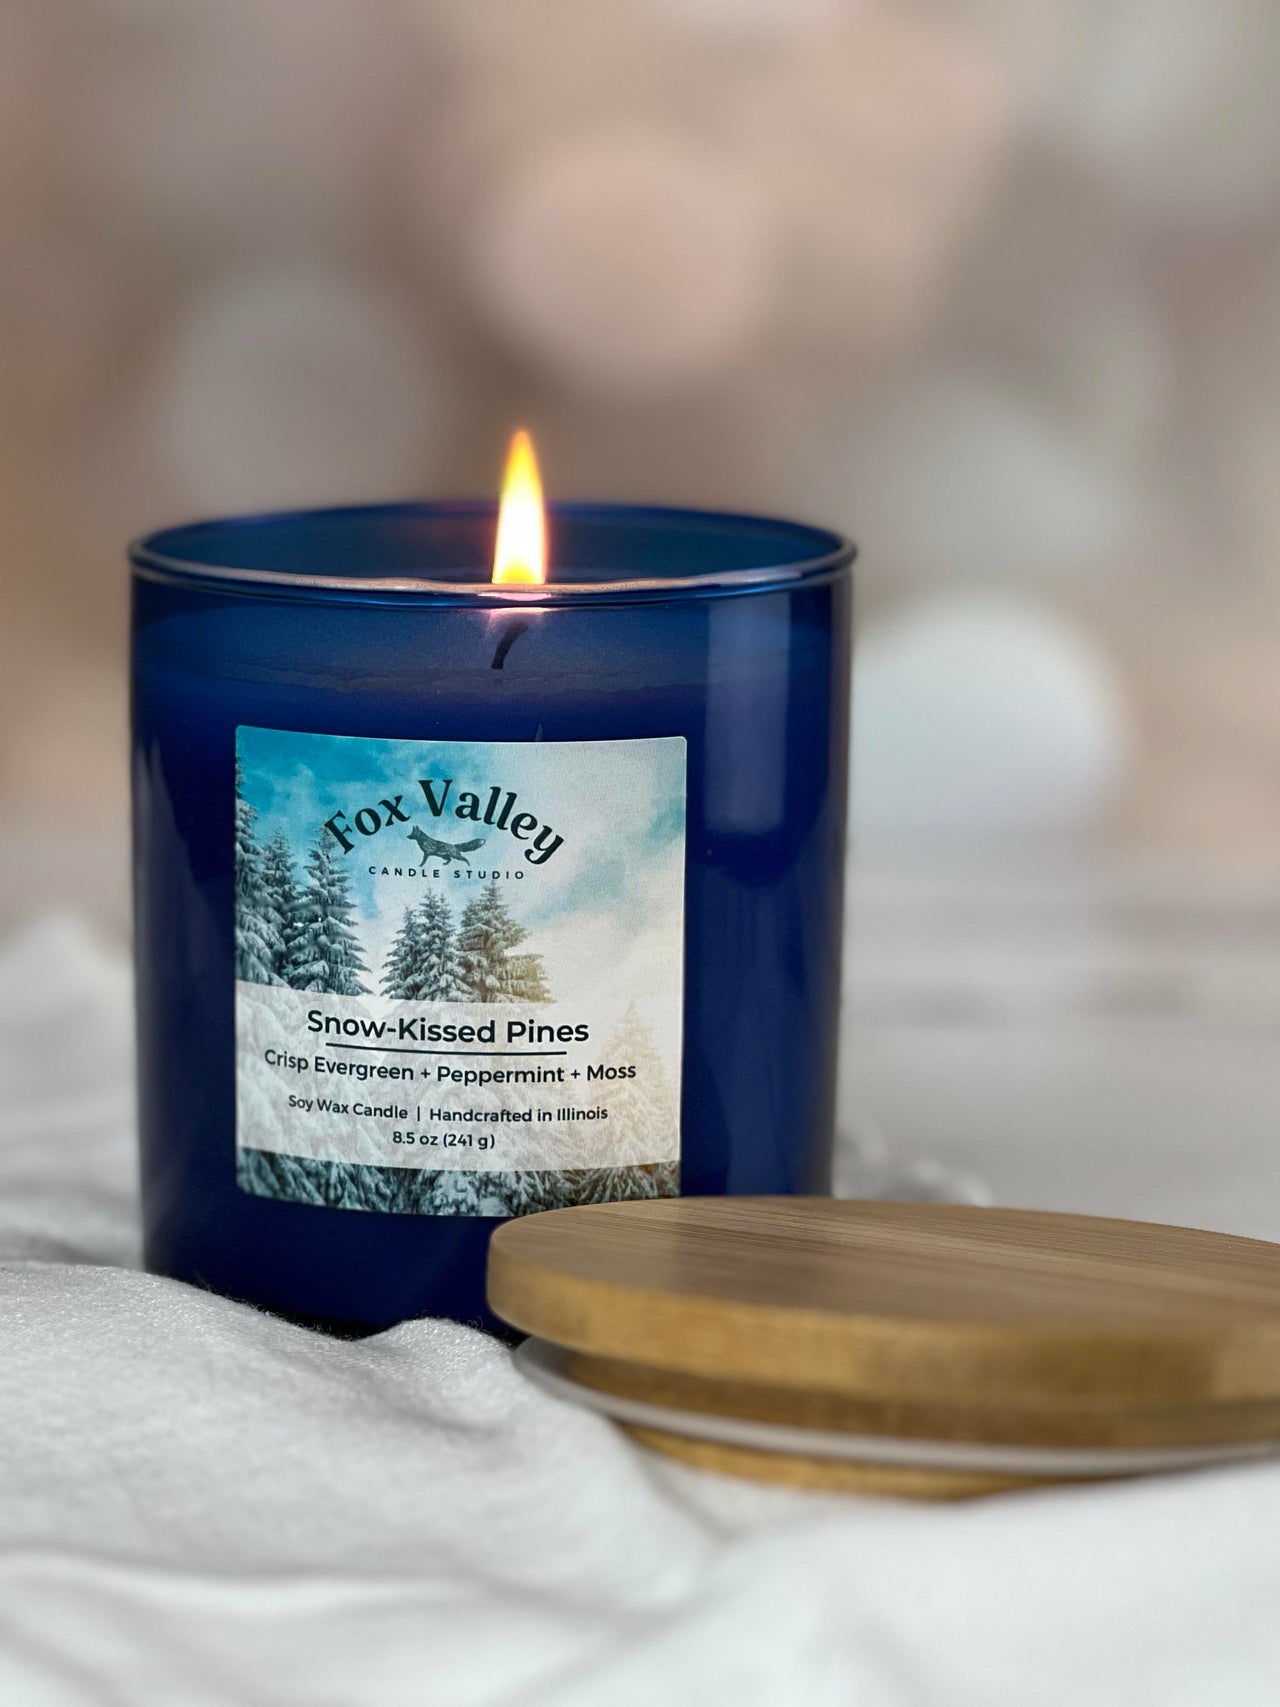 Snow-Kissed Pines Candle